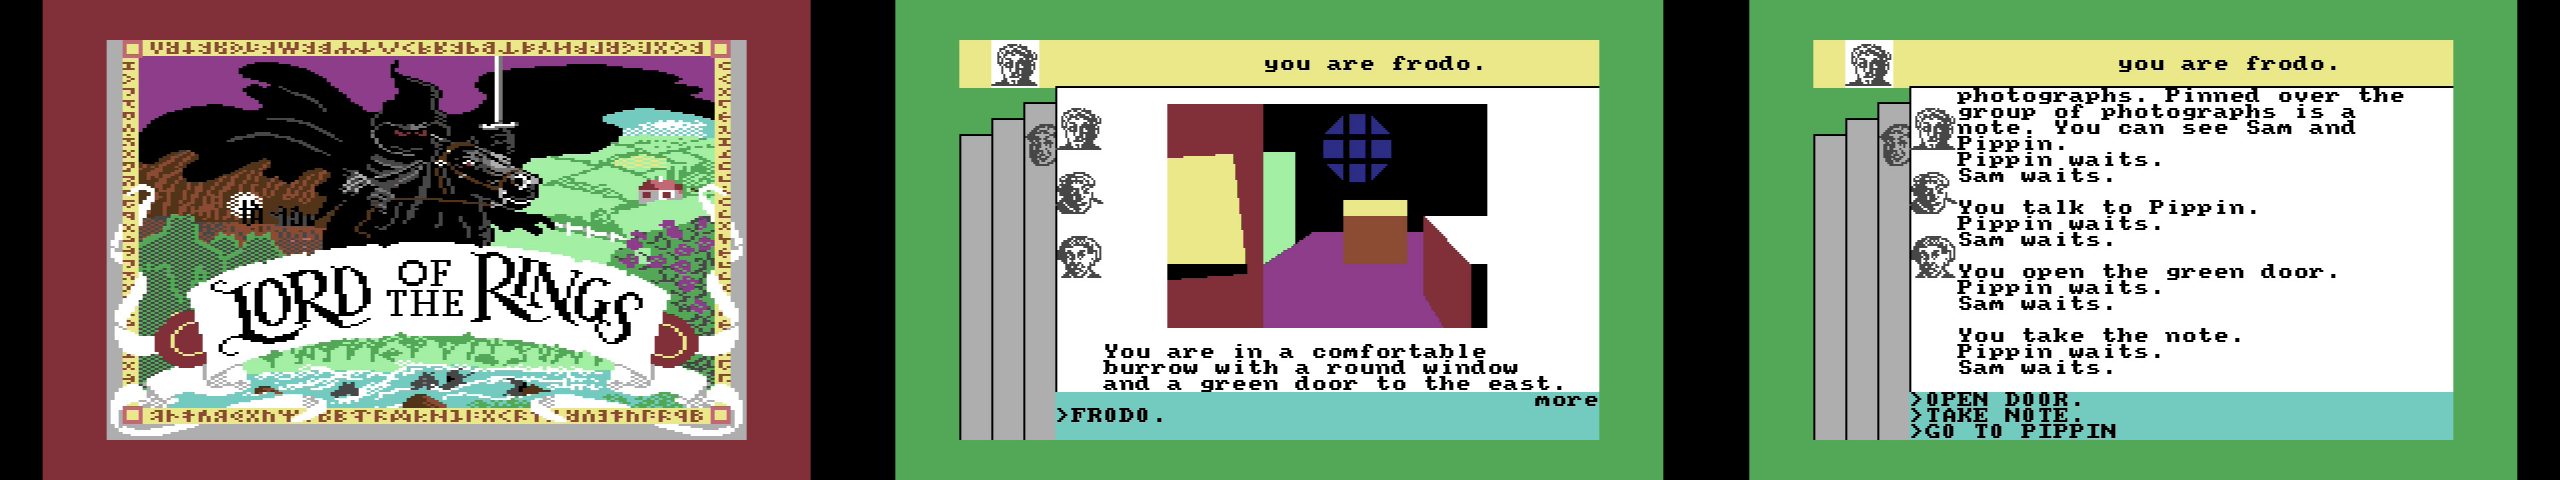 The C64 Maxi Lord of the Rings